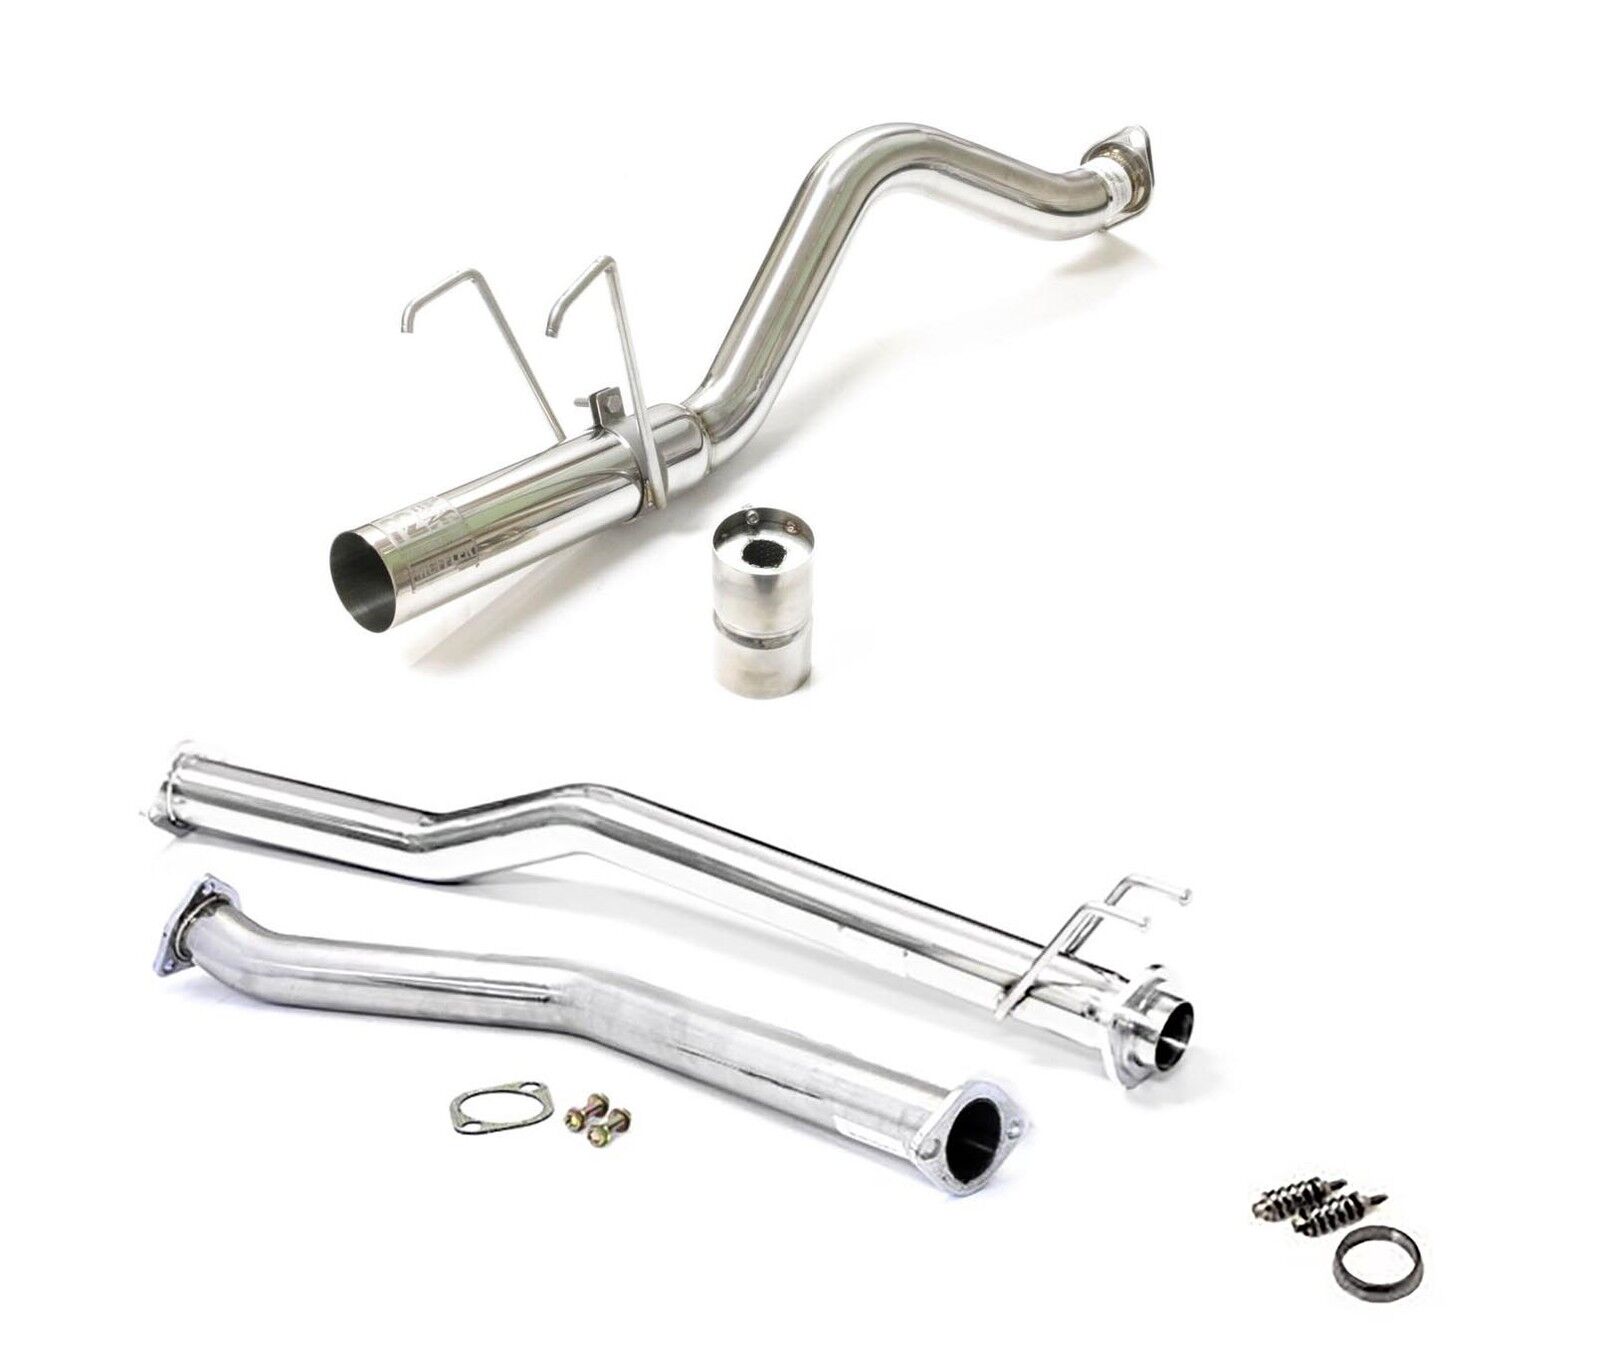 M2 HONDA CIVIC TYPE R EP3 HORNET CAT BACK STAINLESS STEEL EXHAUST SYSTEM Y3183